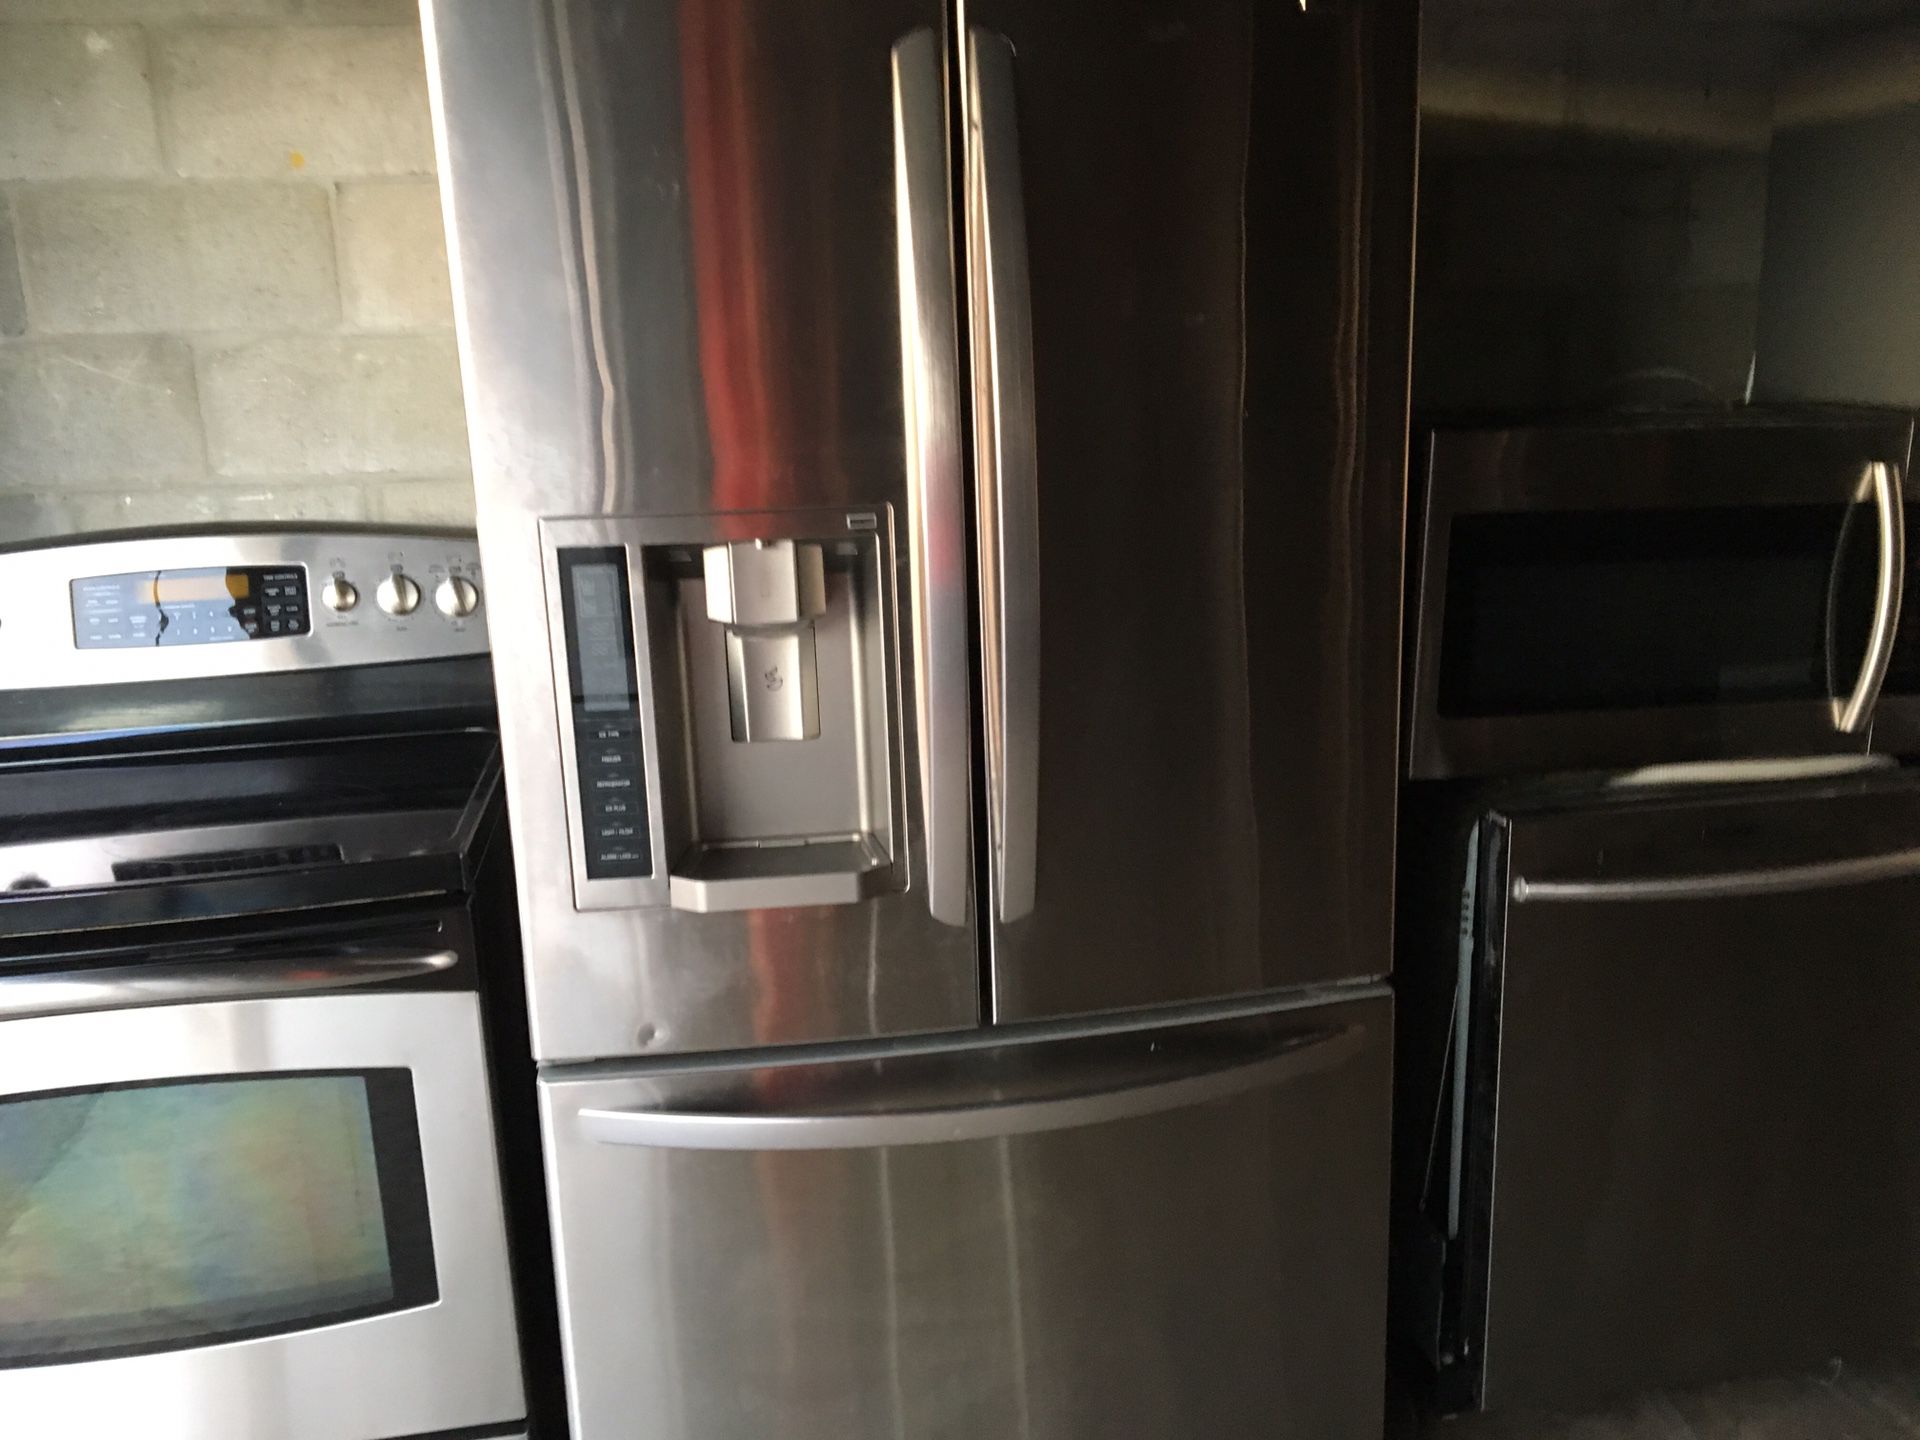 Stainless steel package fridge stove dishwasher microwave just $1,450